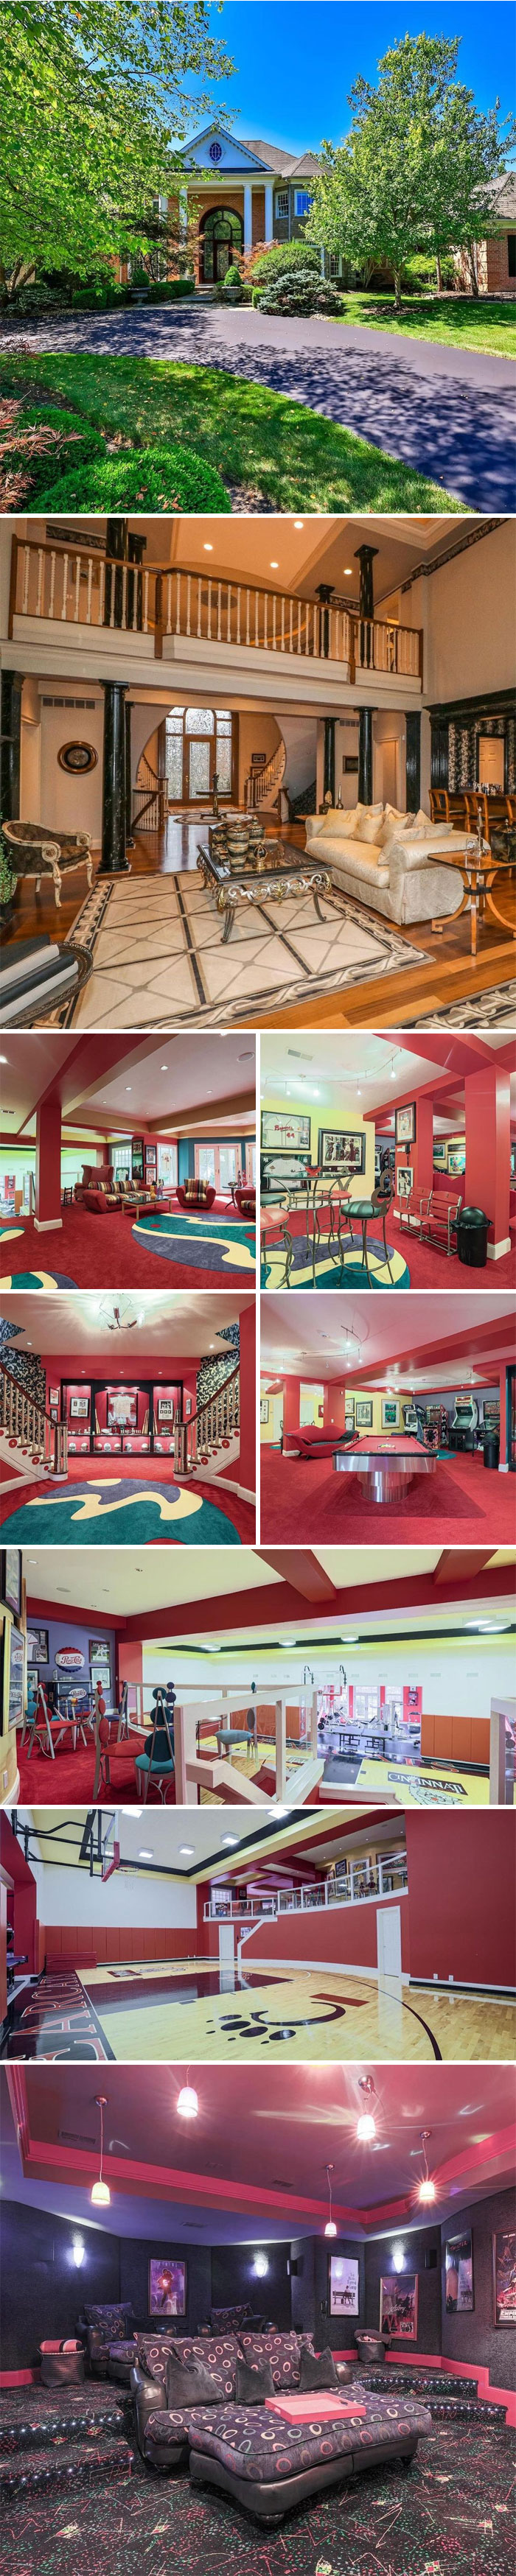 Verified For #zgwmansionmondays, If Saved By The Bell Was Your Favorite Show Growing Up I’ve Got The Perfect Basement For You. Currently Listed For $2,999,999 In Cincinnati, Oh. 6 Bd, 9 Ba (Lol). 8,347 Sq Ft. 5.61 Acres